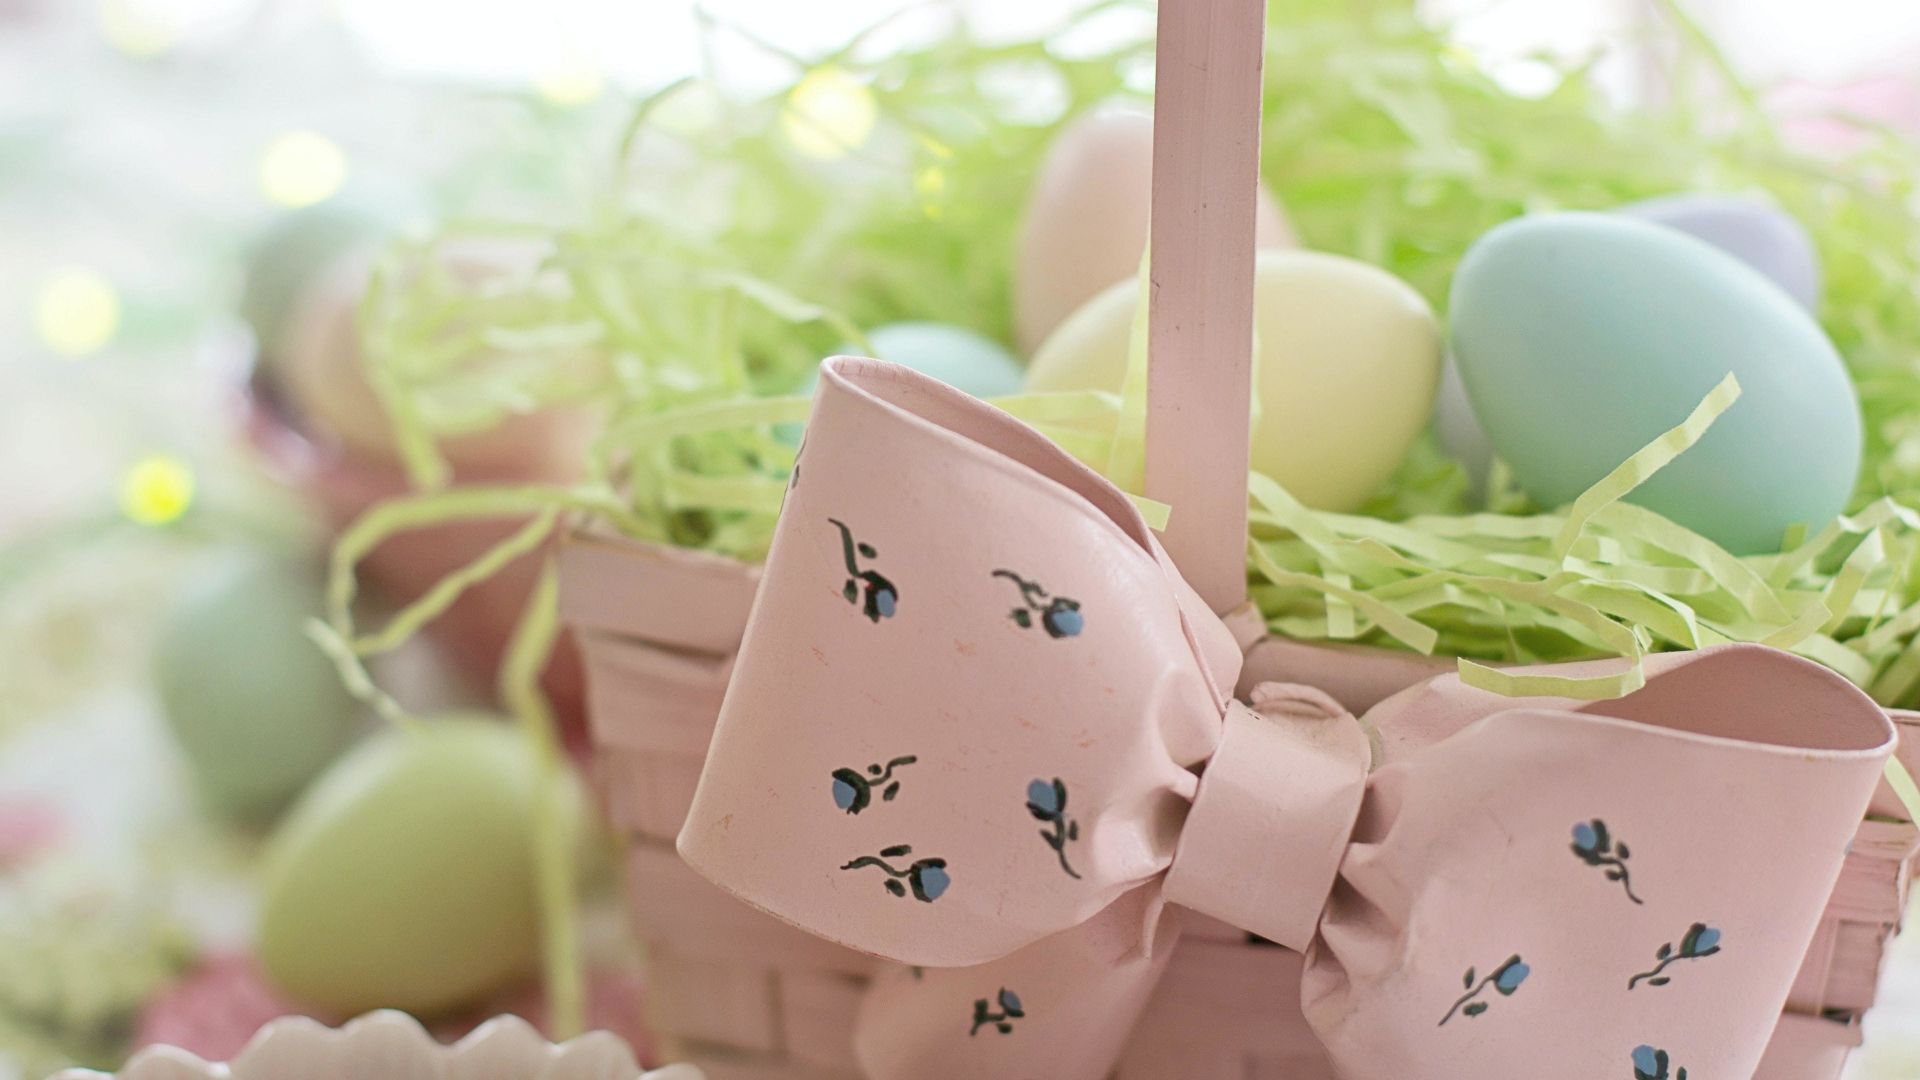 Download 1920x1080 wallpaper eggs basket, easter, full hd, hdtv, fhd, 1080p, 1920x1080 HD image, background, 24800